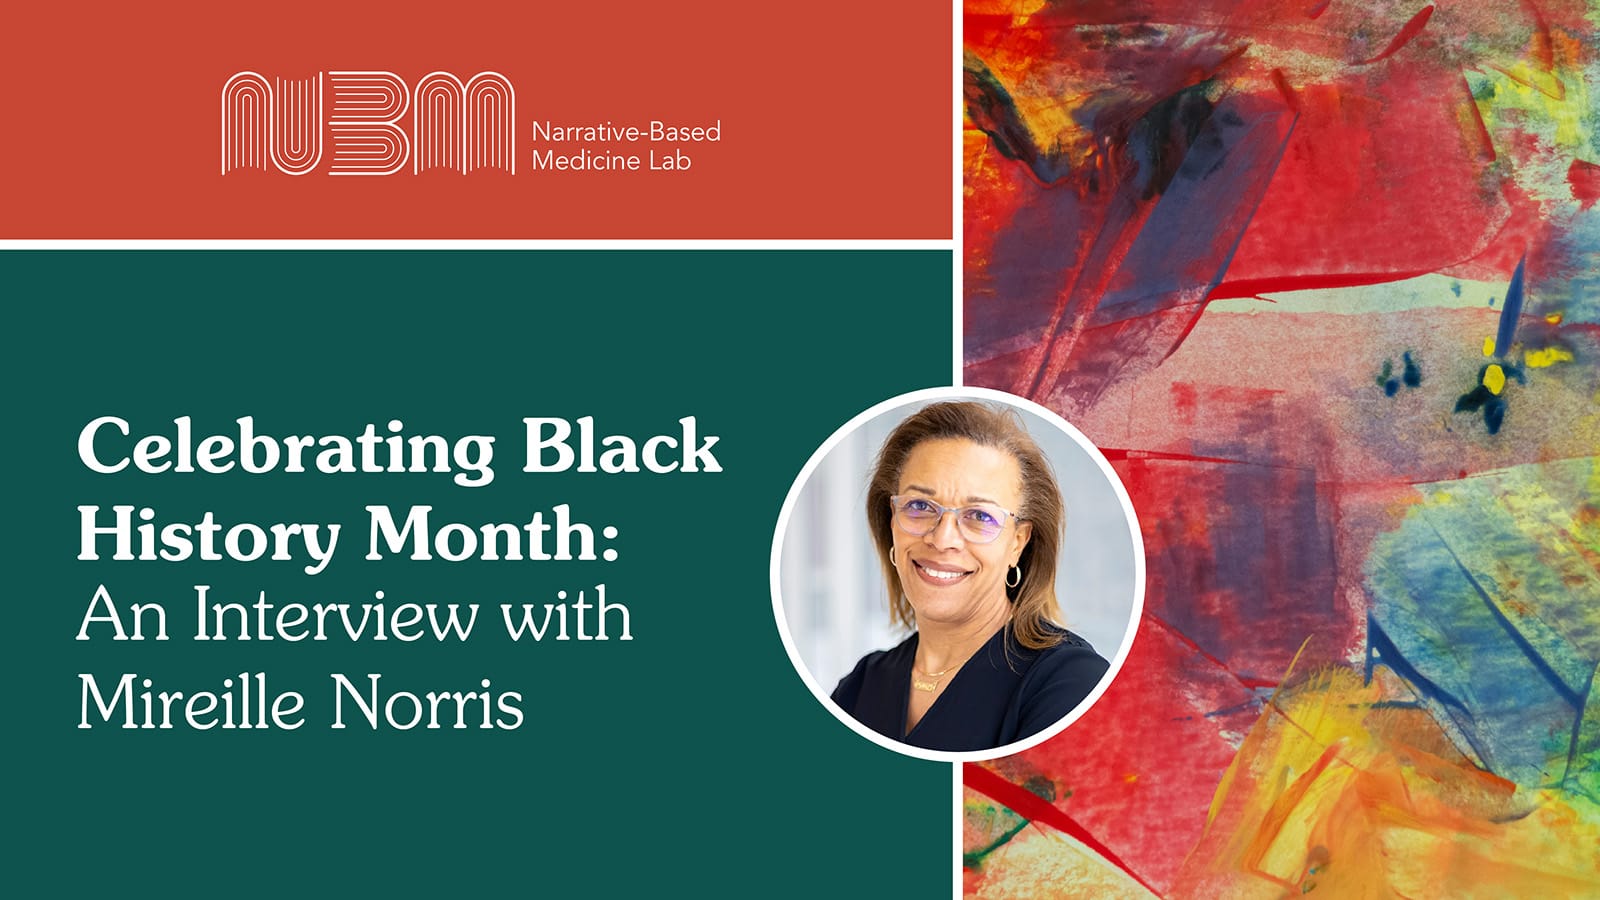 Celebrating Black History Month: An Interview with Mireille Norris